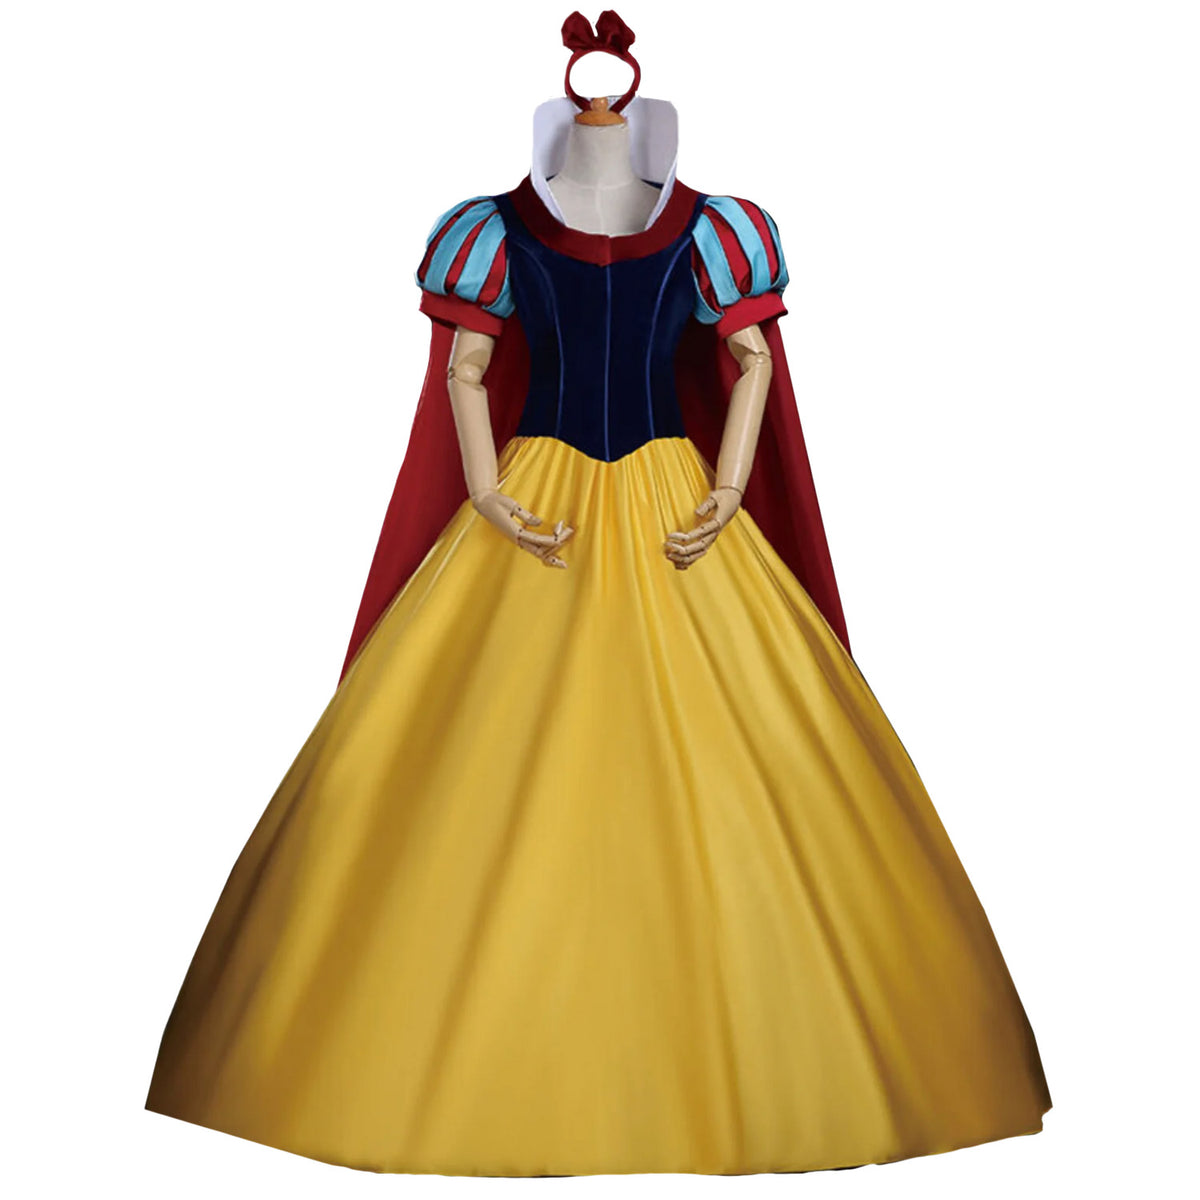 Film Snow White Inspired Cosplay Adult Costume